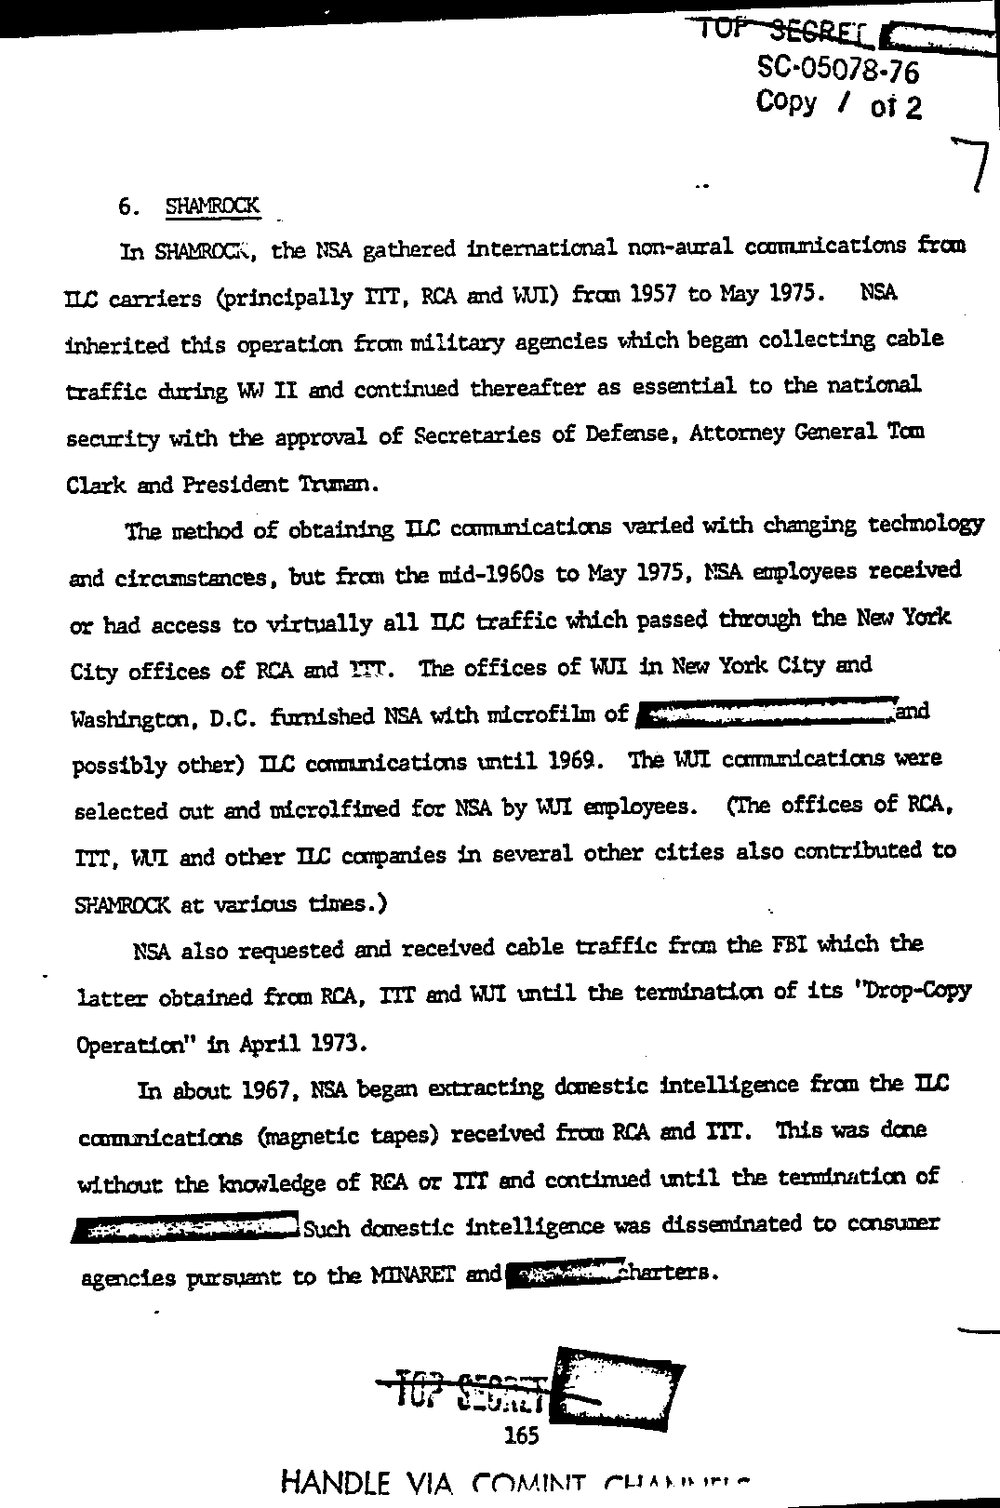 Page 173 from Report on Inquiry Into CIA Related Electronic Surveillance Activities